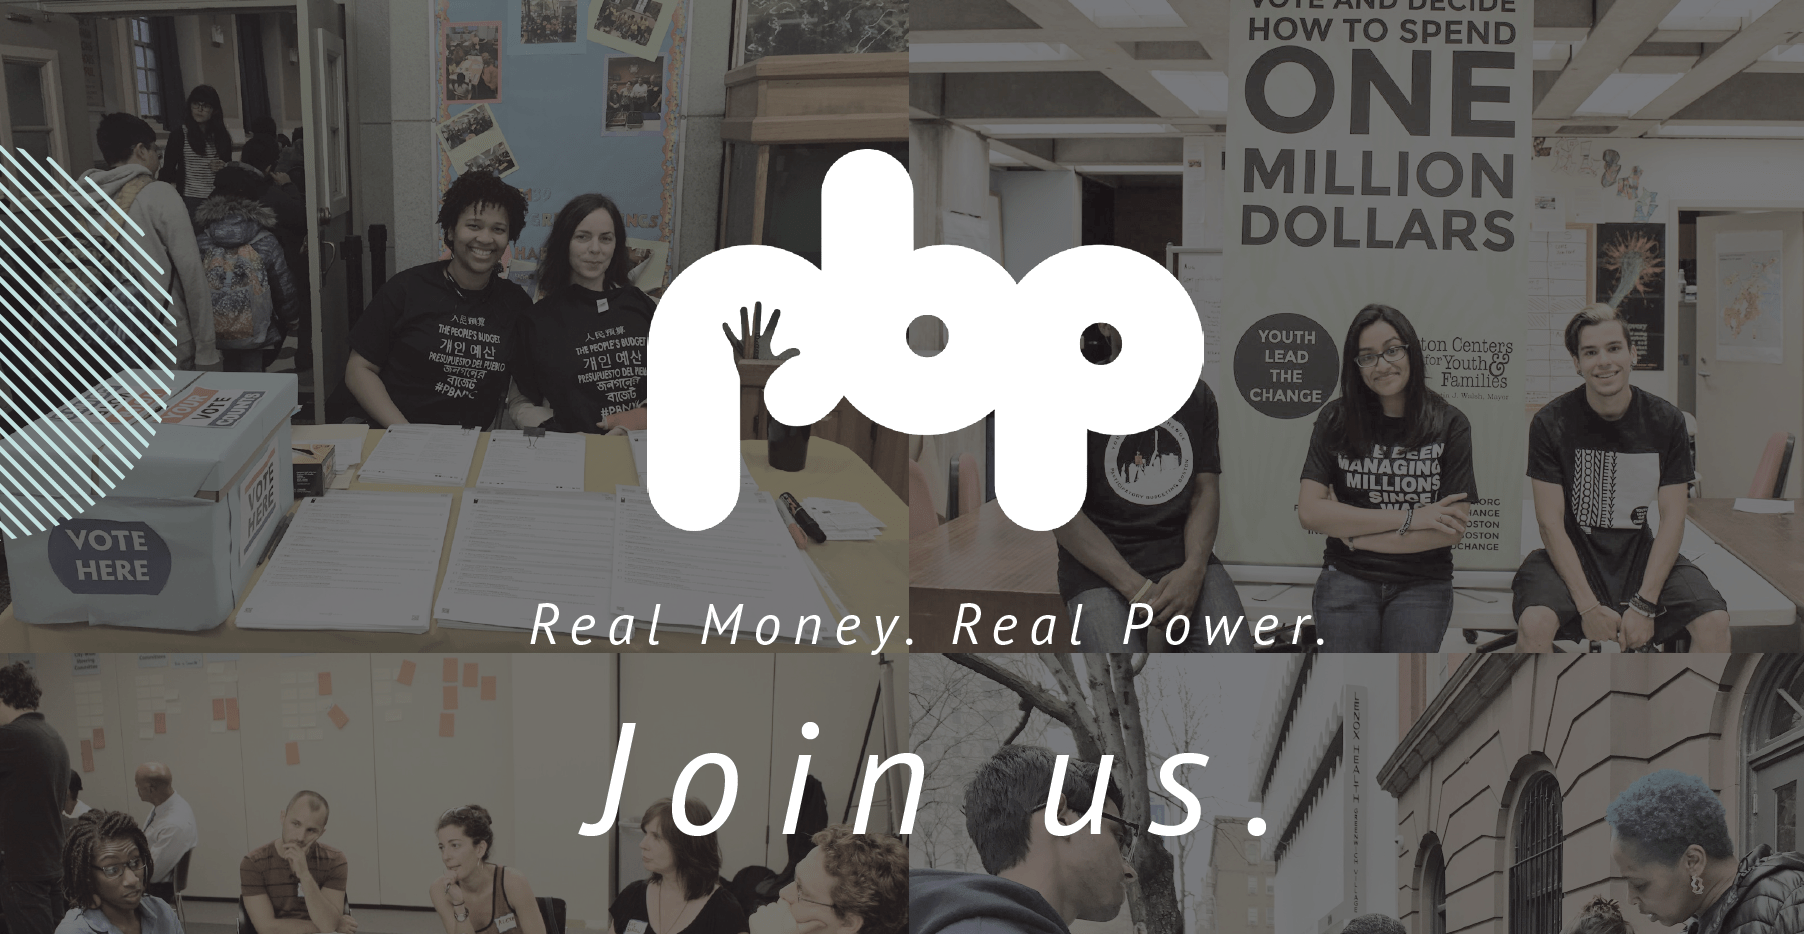 PBP - Real Money. Real Power. Join us.